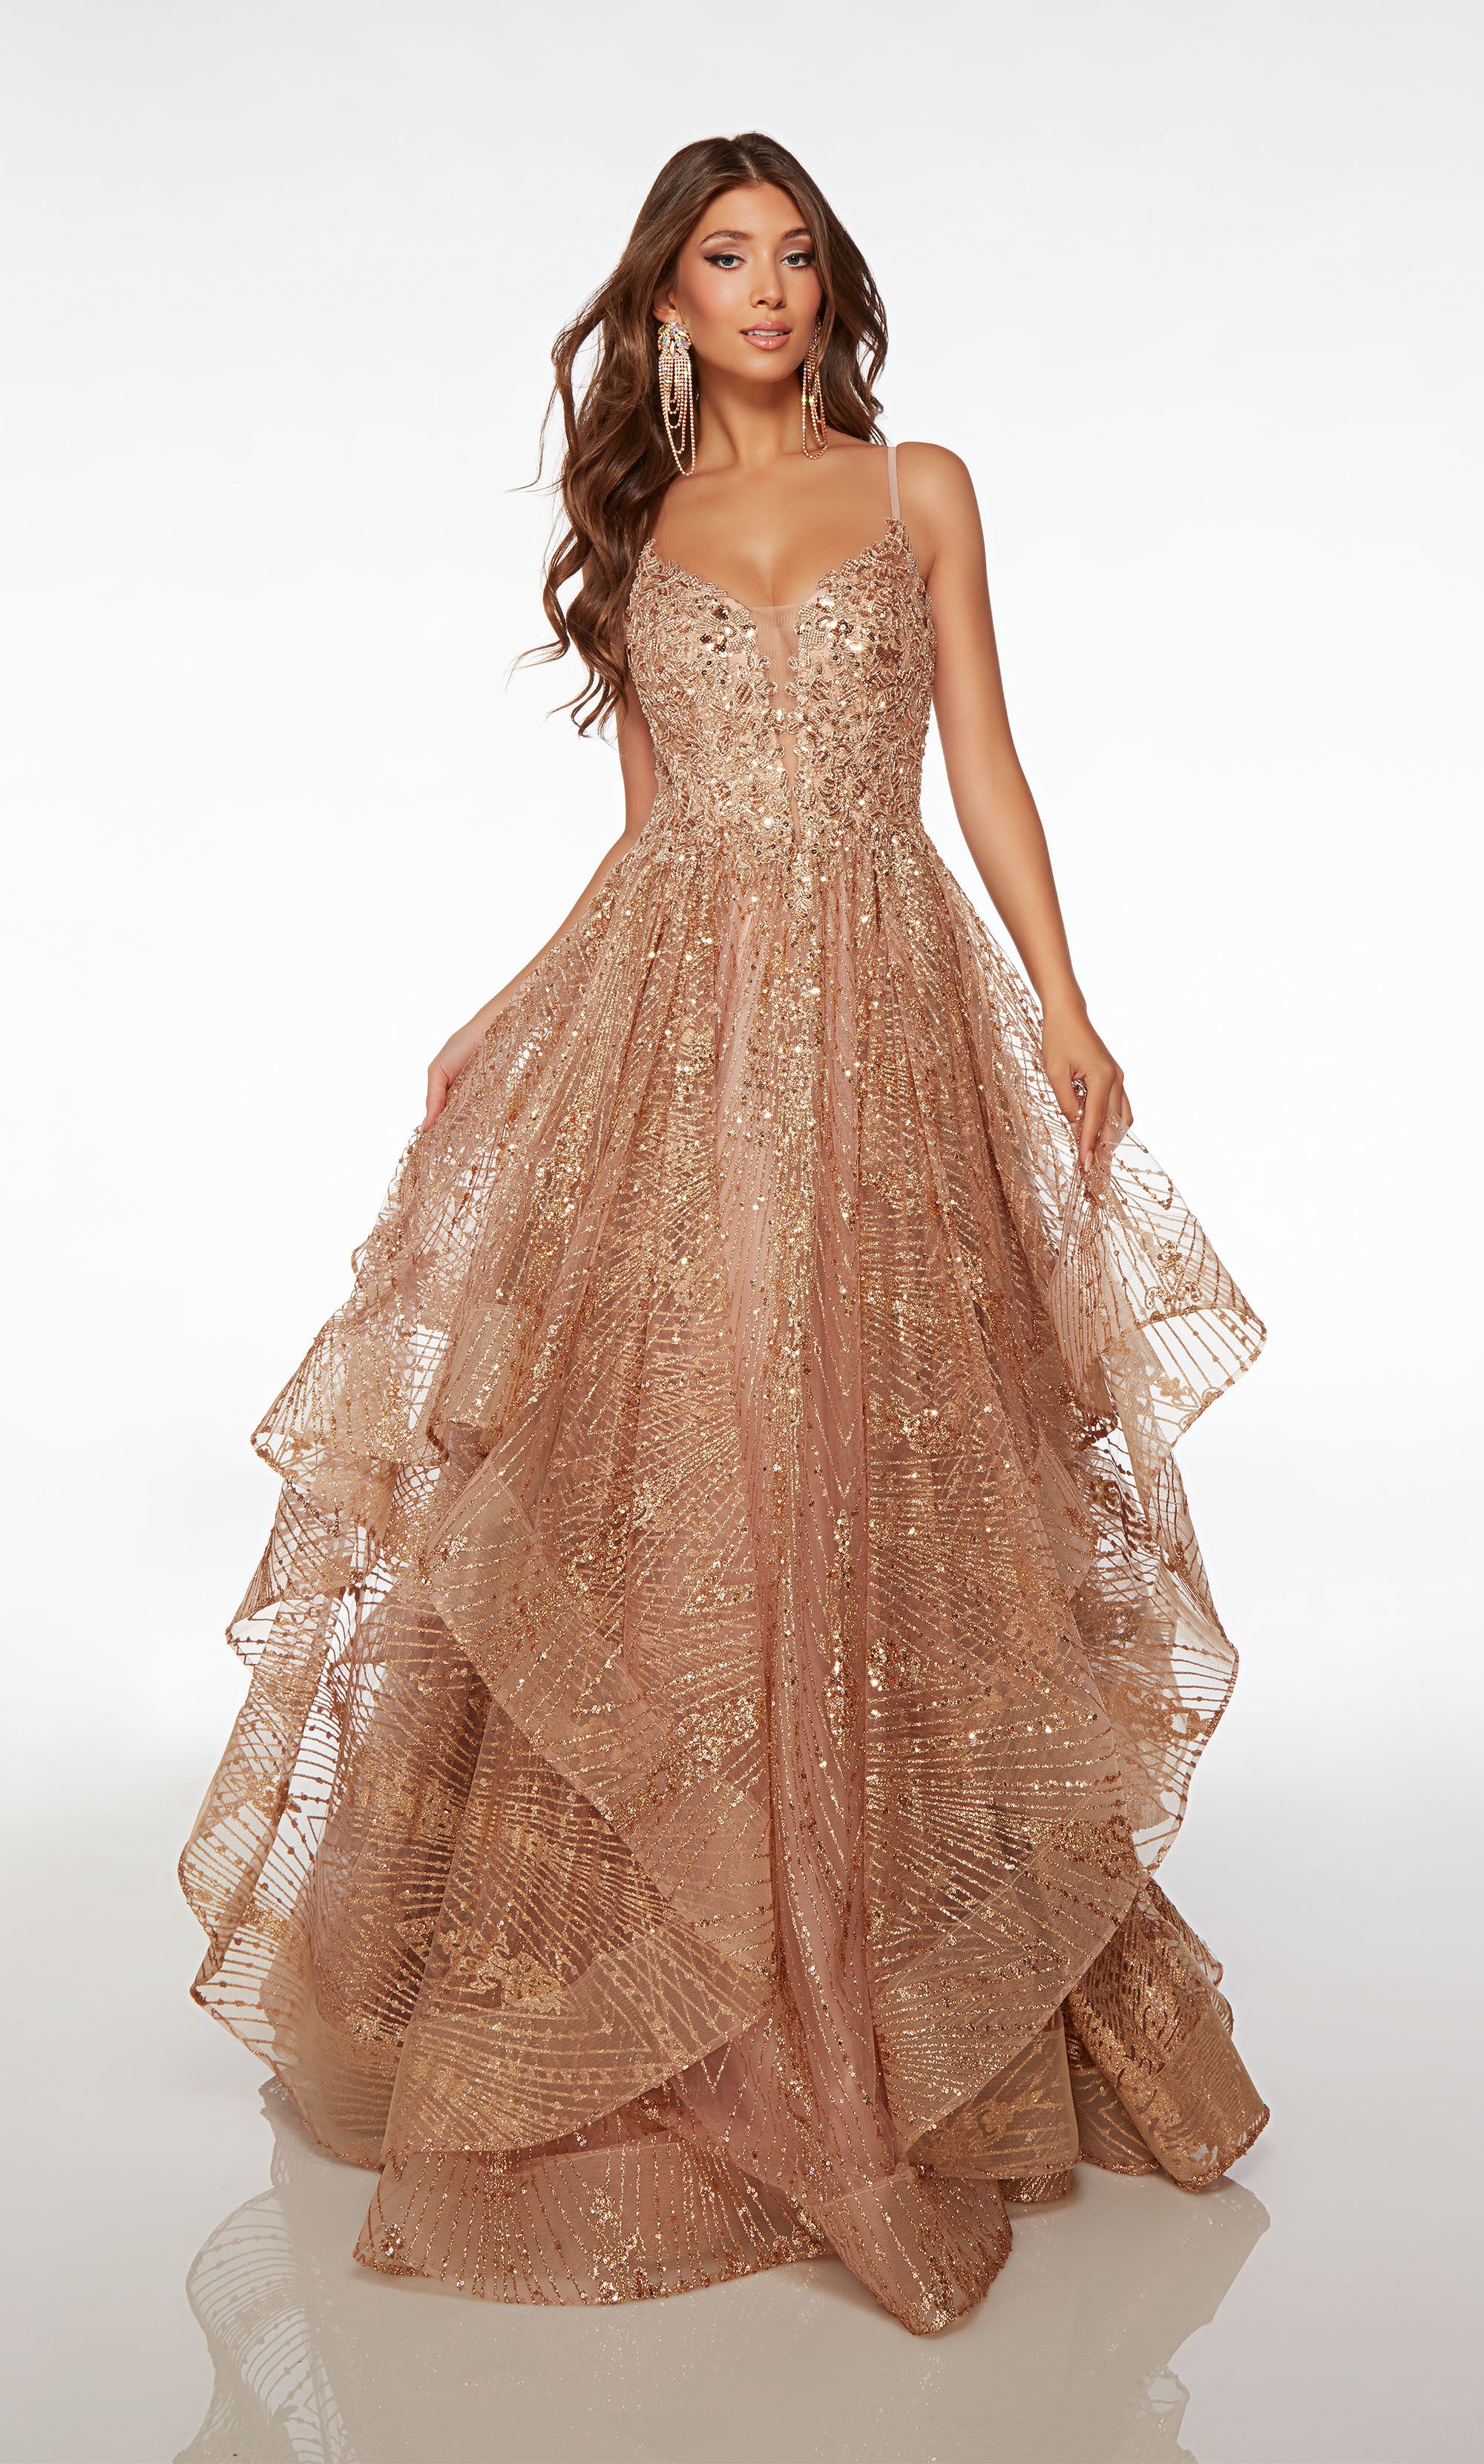 Striped Rose Gold Sequin Open Back Mermaid Prom Dress - VQ